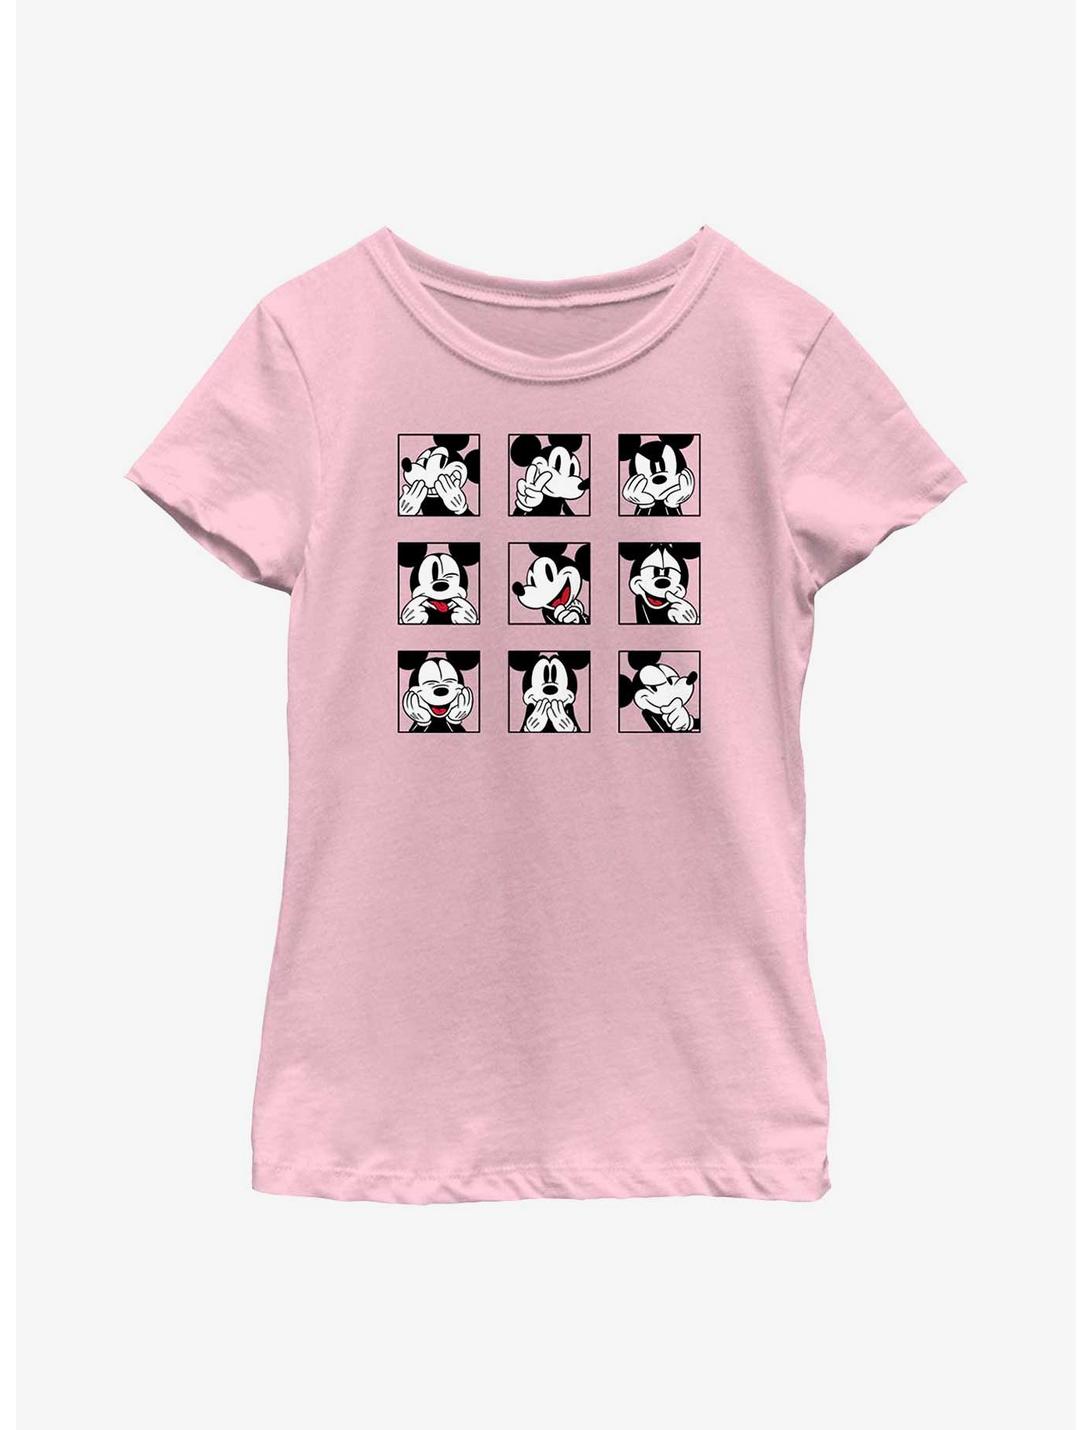 Disney Mickey Mouse Grid Expressions Youth Girls T-Shirt, PINK, hi-res